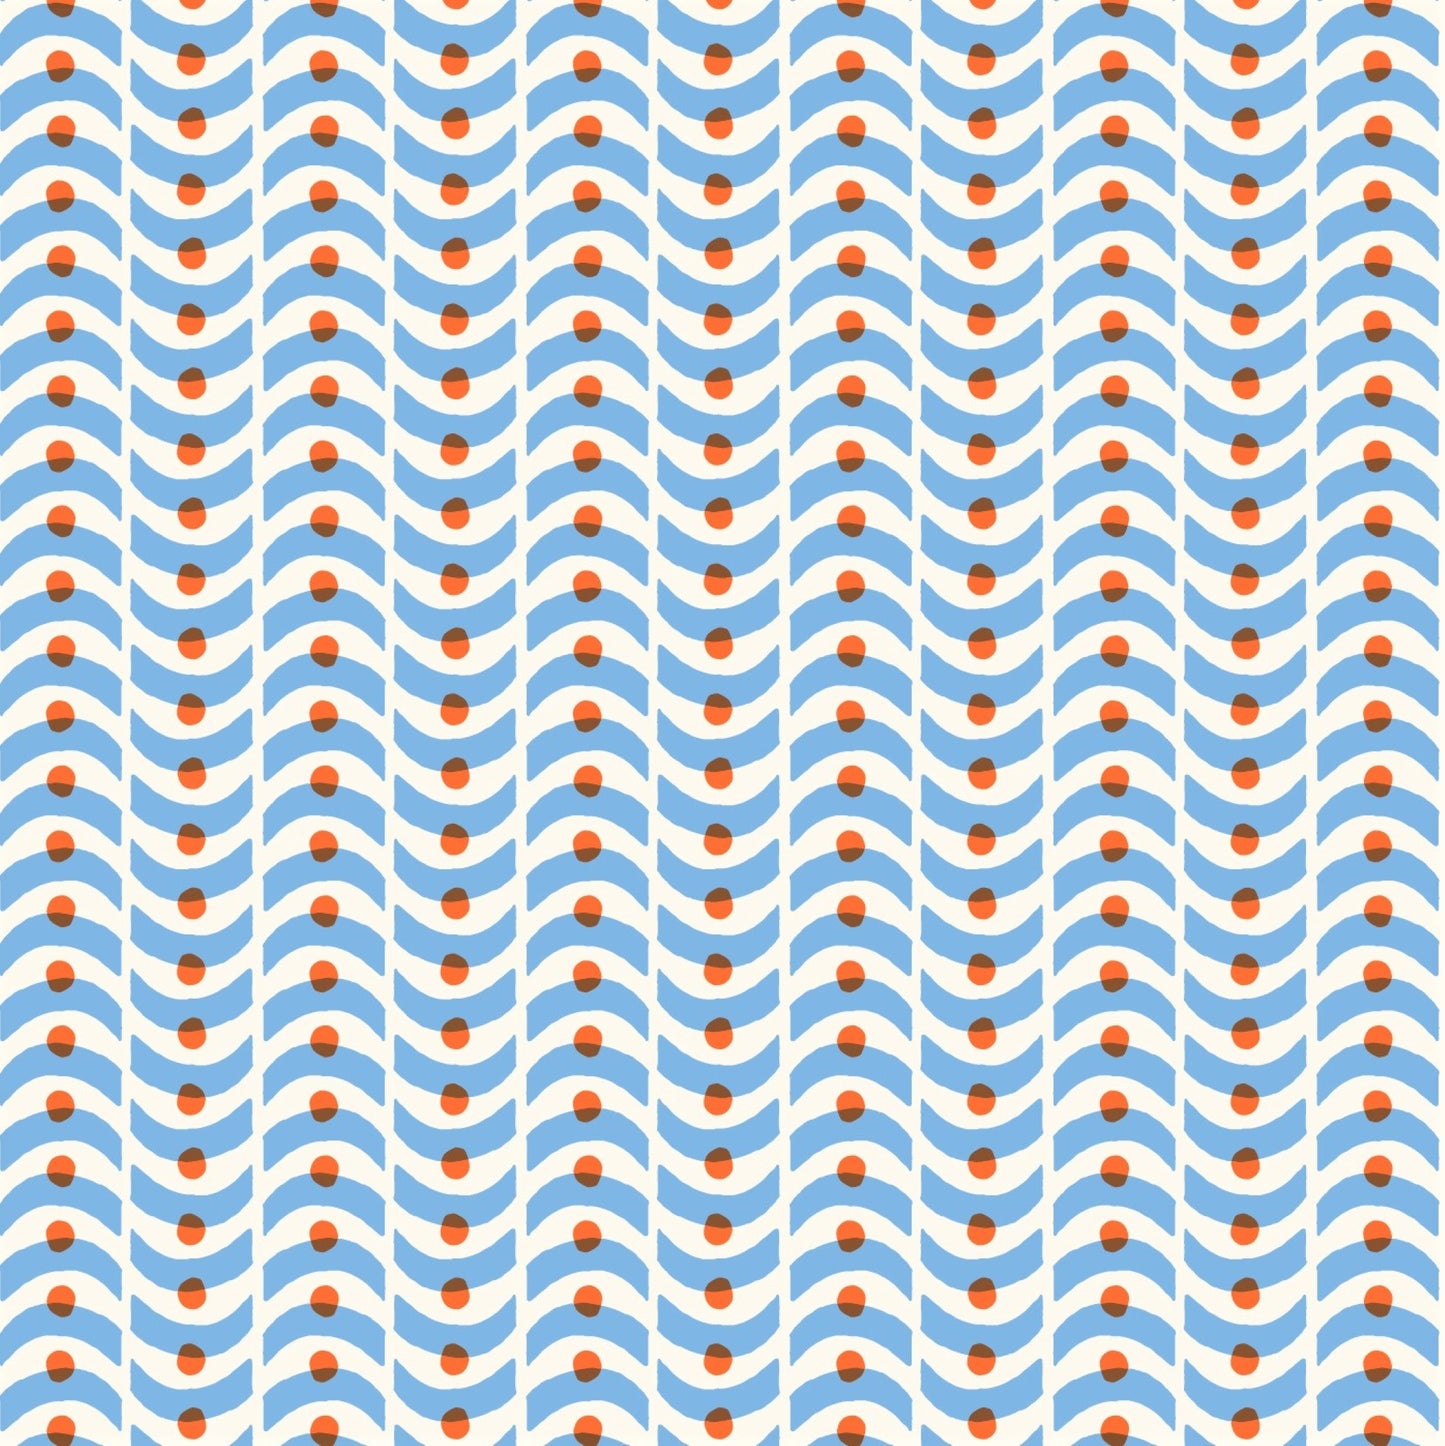 patterned paper, gift wrap with a geometric pale blue wavy pattern and orange dot. By Ariana Martin